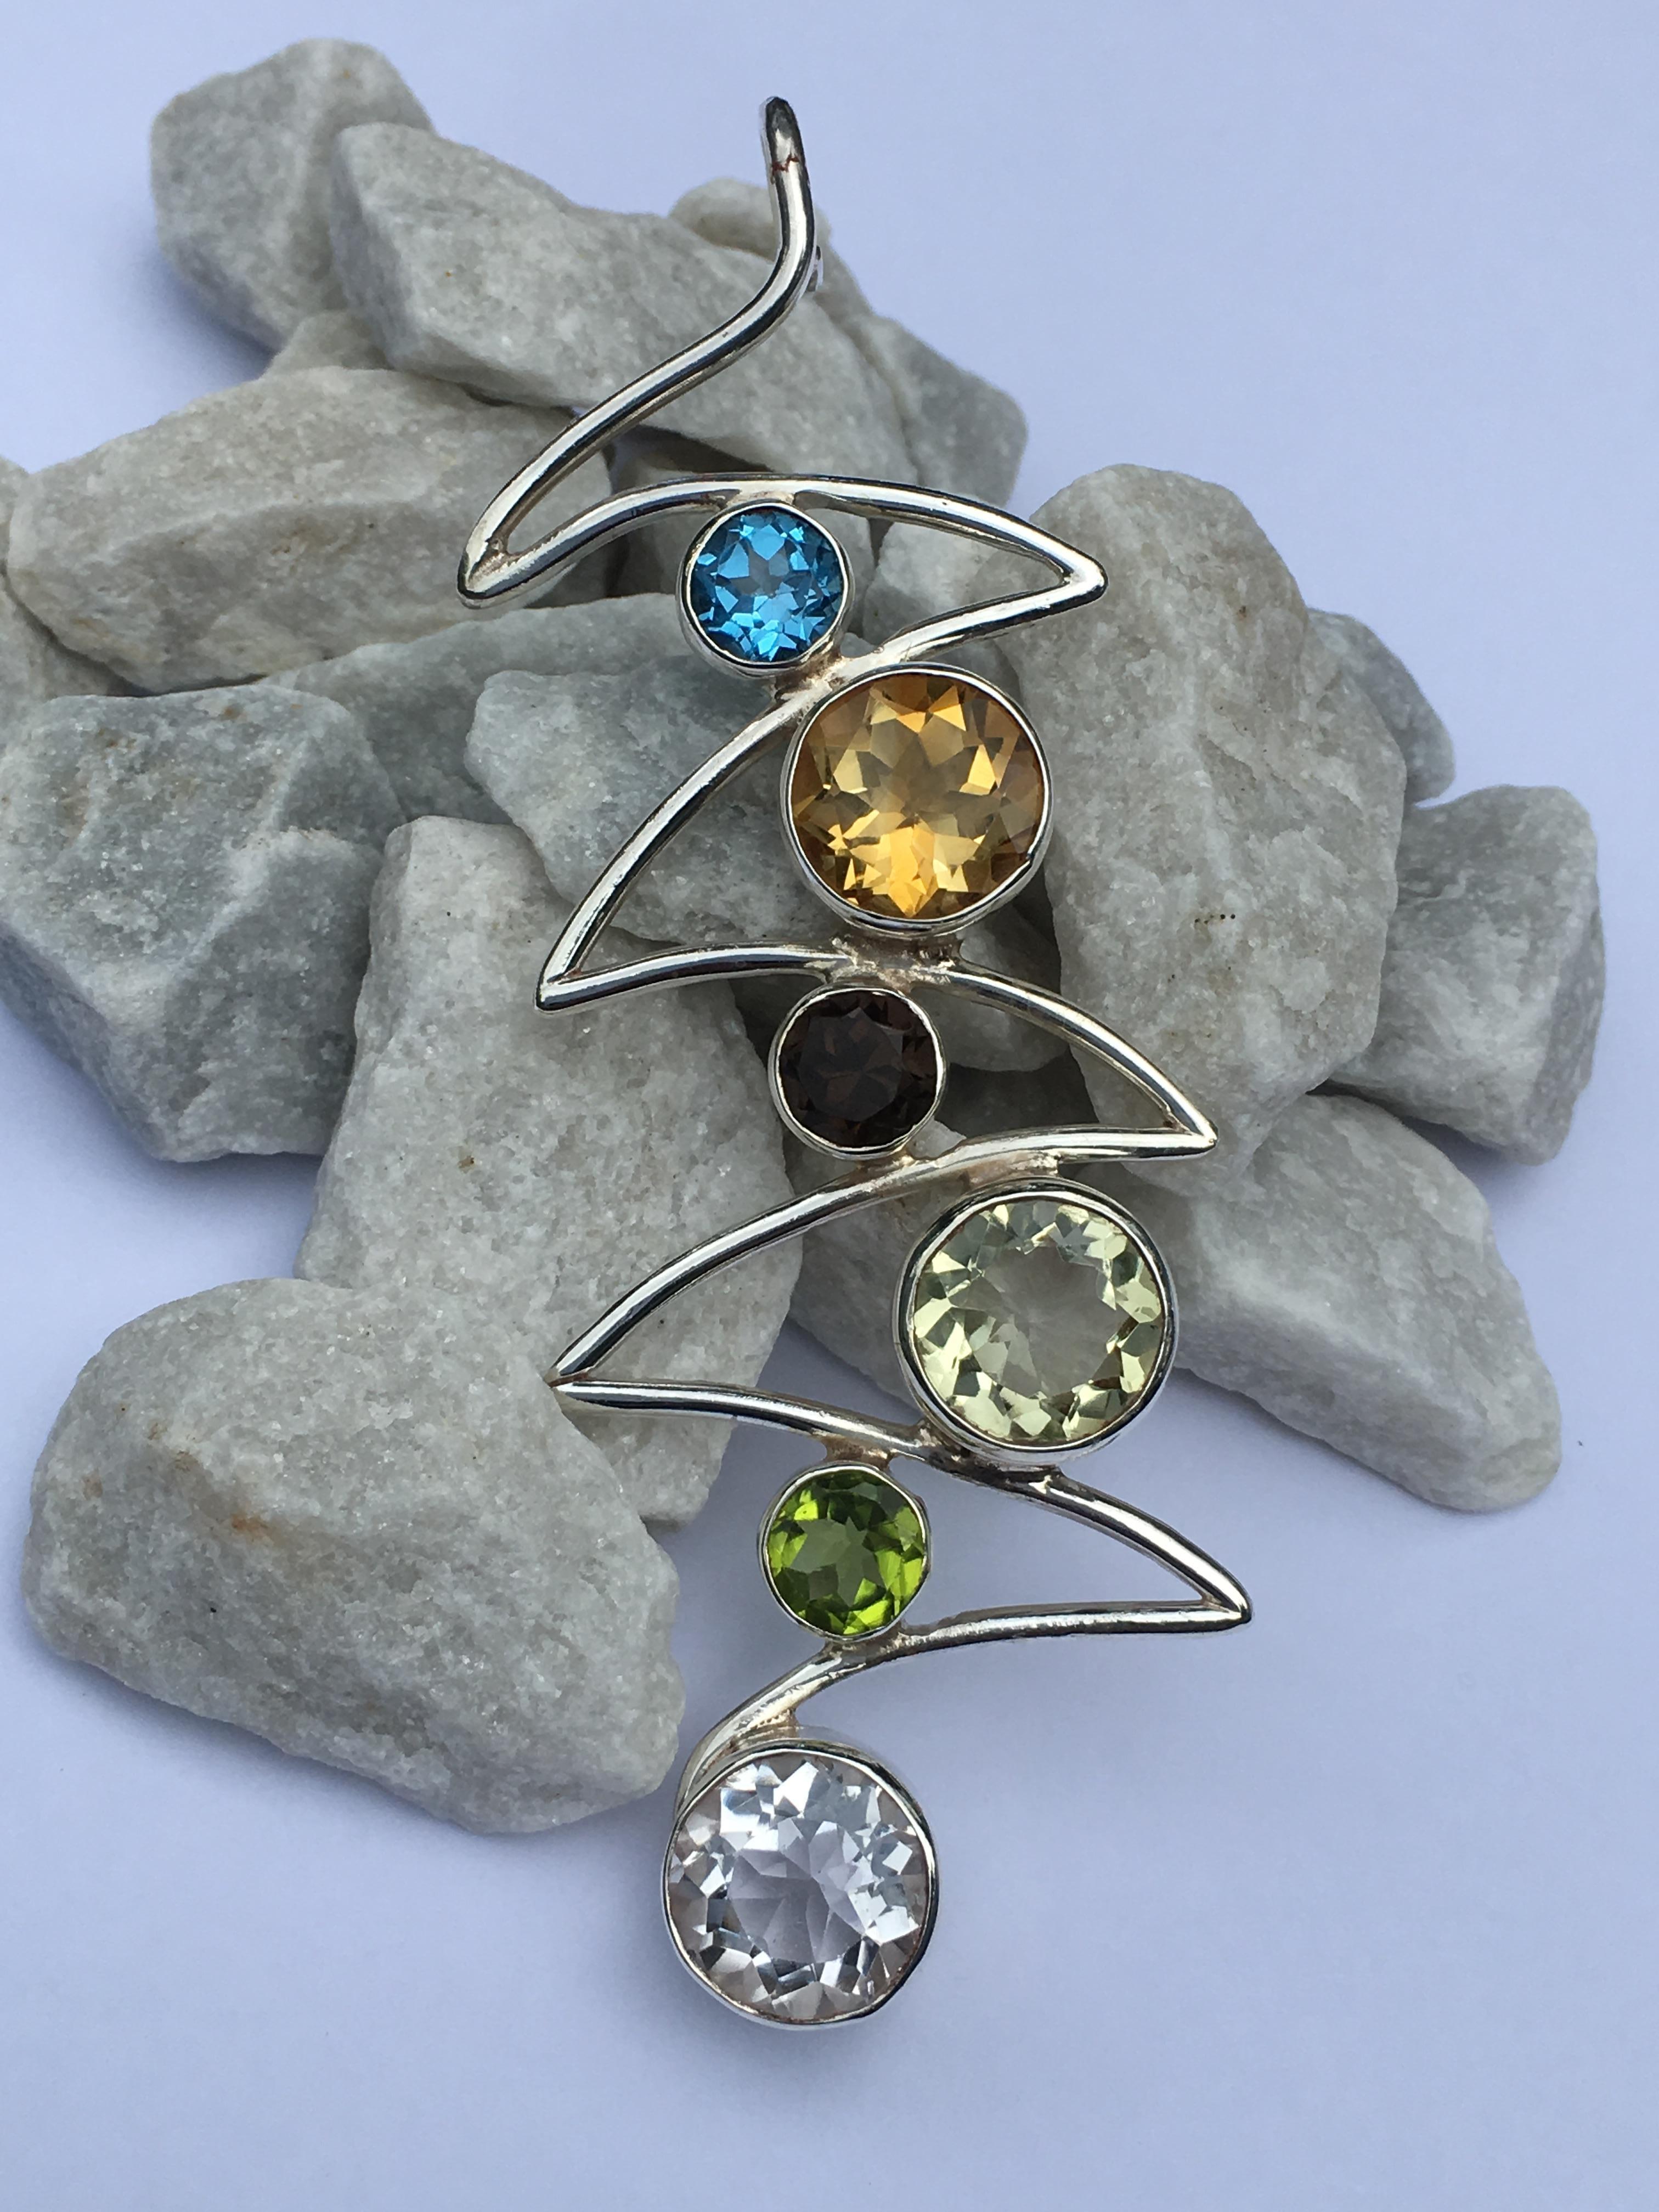 Natural blue topaz. smokey topaz and Peridot are 7 mm round and Citrine, lemon quartz and rock crystal are 11 mm round stones. All stone are hand cut and polished . This  wave pendant is also called chakra pendant.
This pendant is one of a kind and